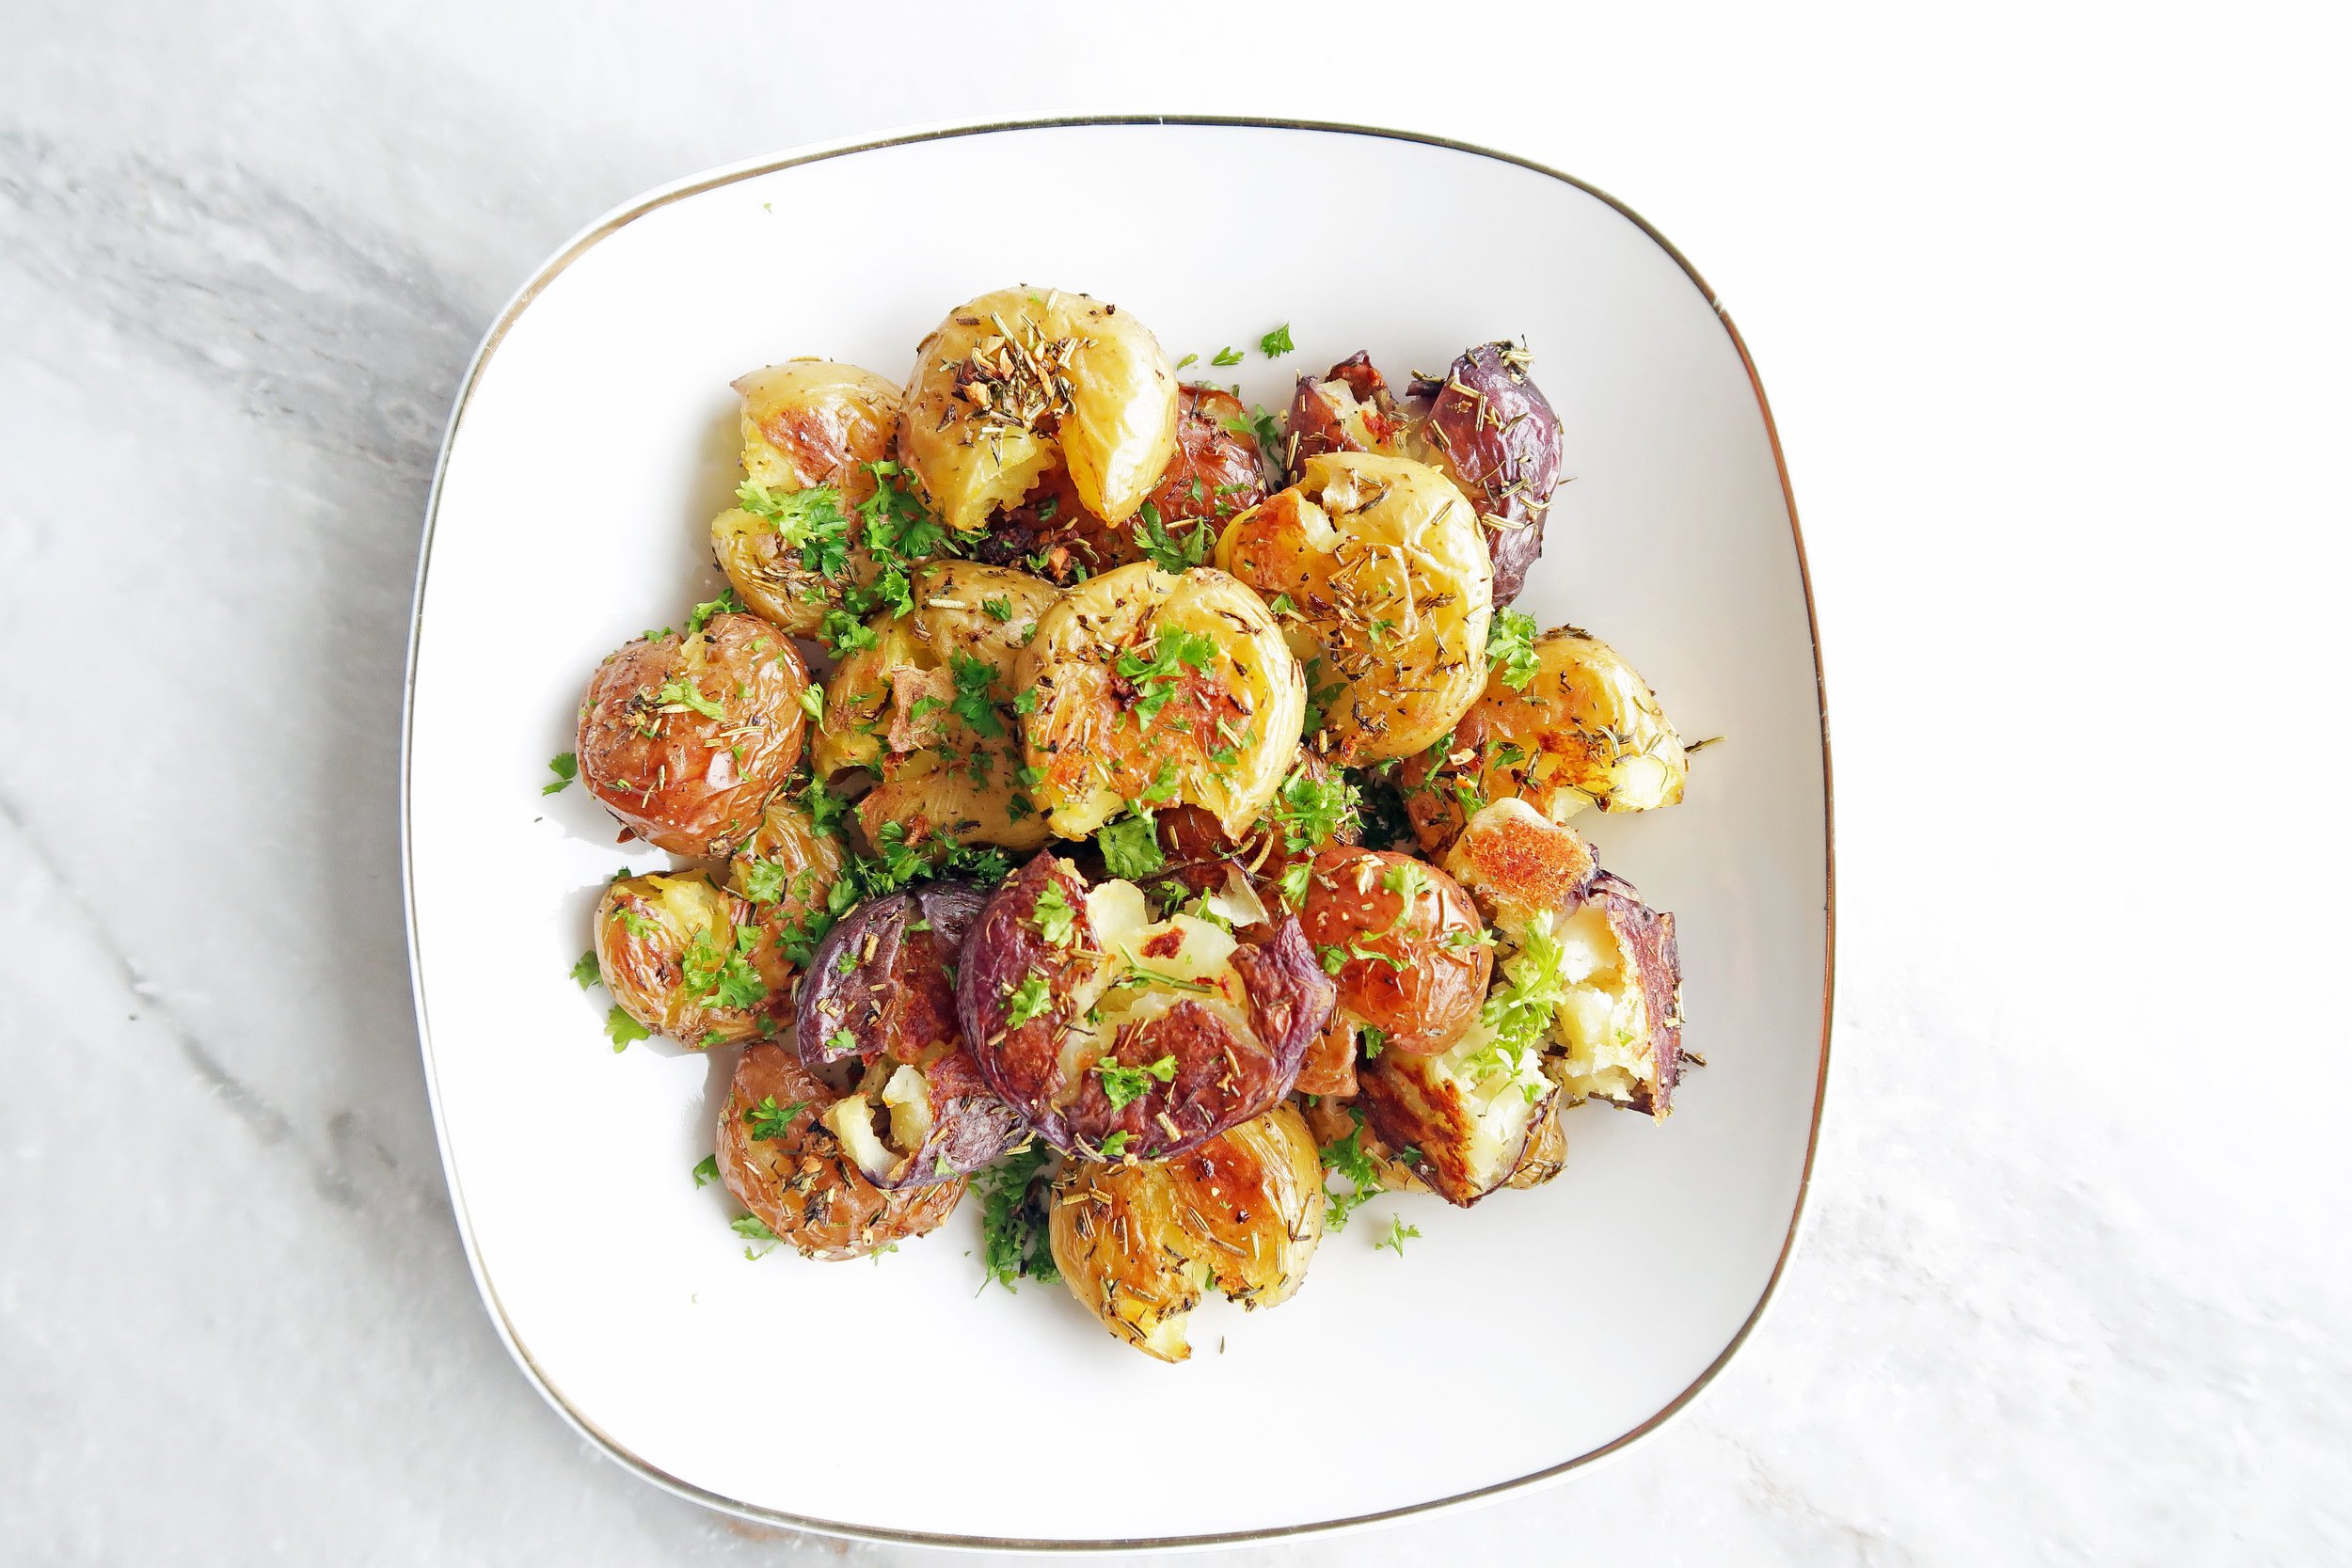 Crispy Garlic Smashed Baby Potatoes on a white plate; An easy, gluten-free, vegan side dish with a crispy outside and fluffy inside.